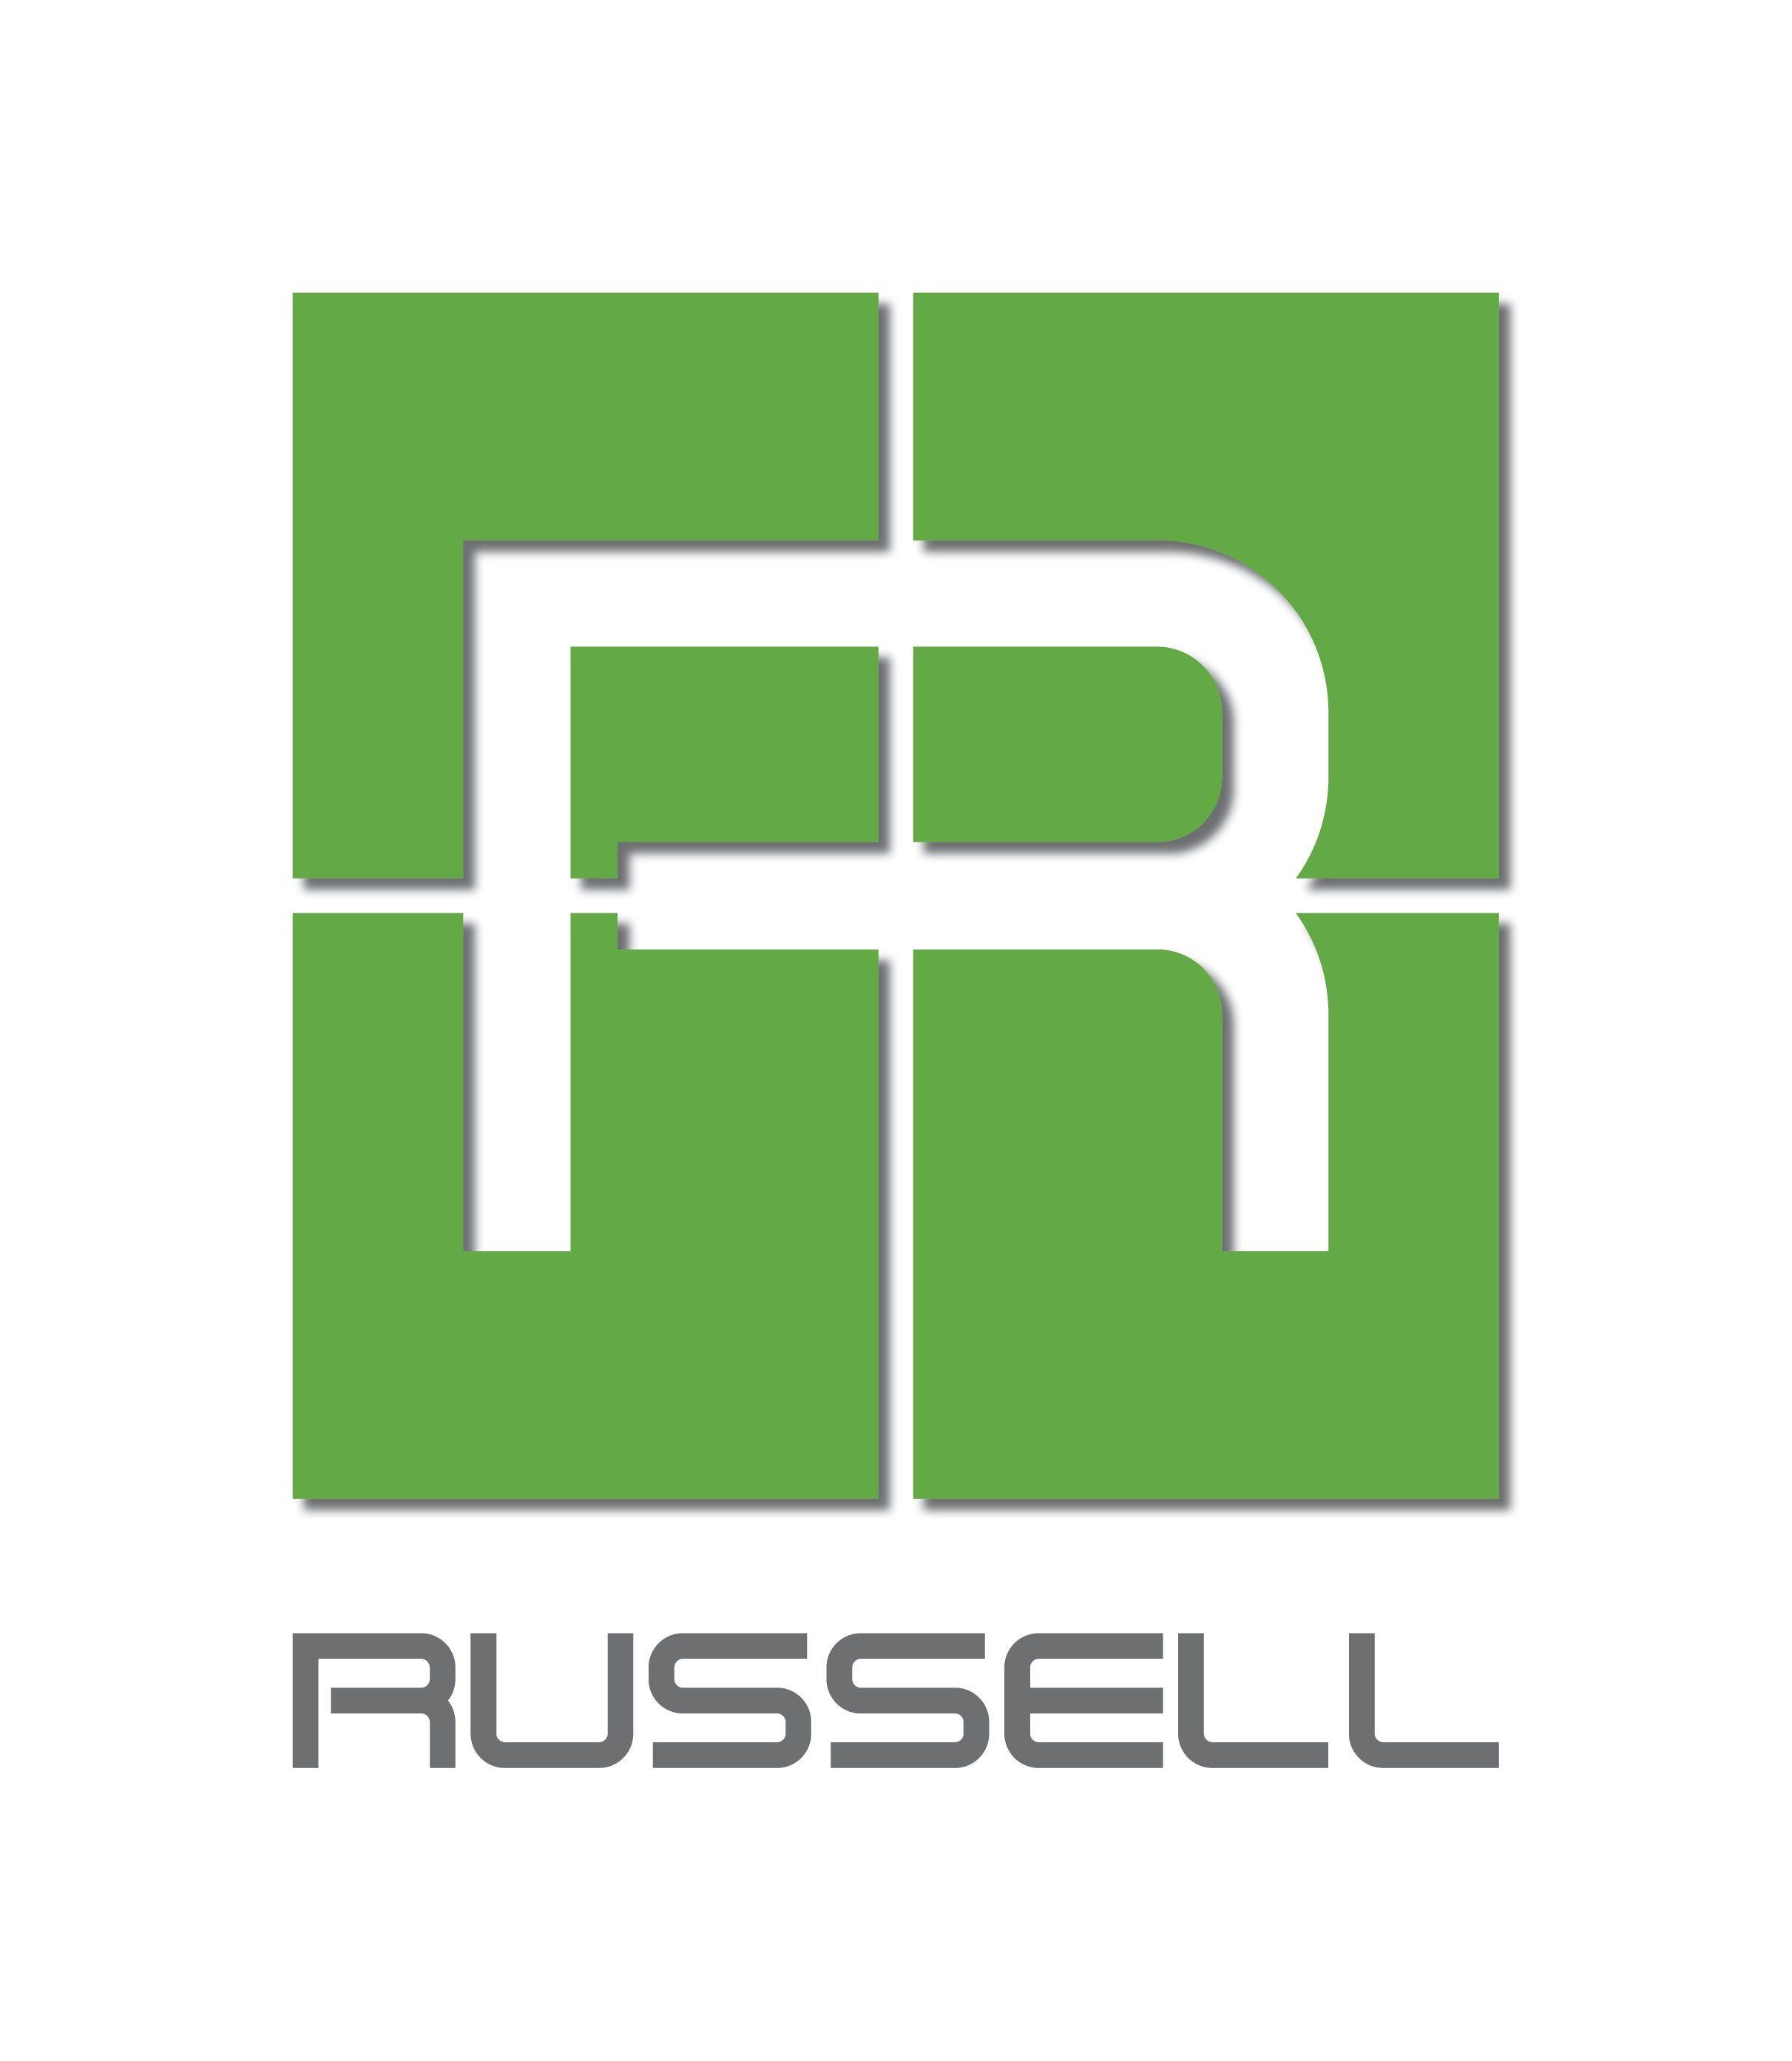 Russell Logo - H.J. Russell and Company Moves Headquarters to Midtown